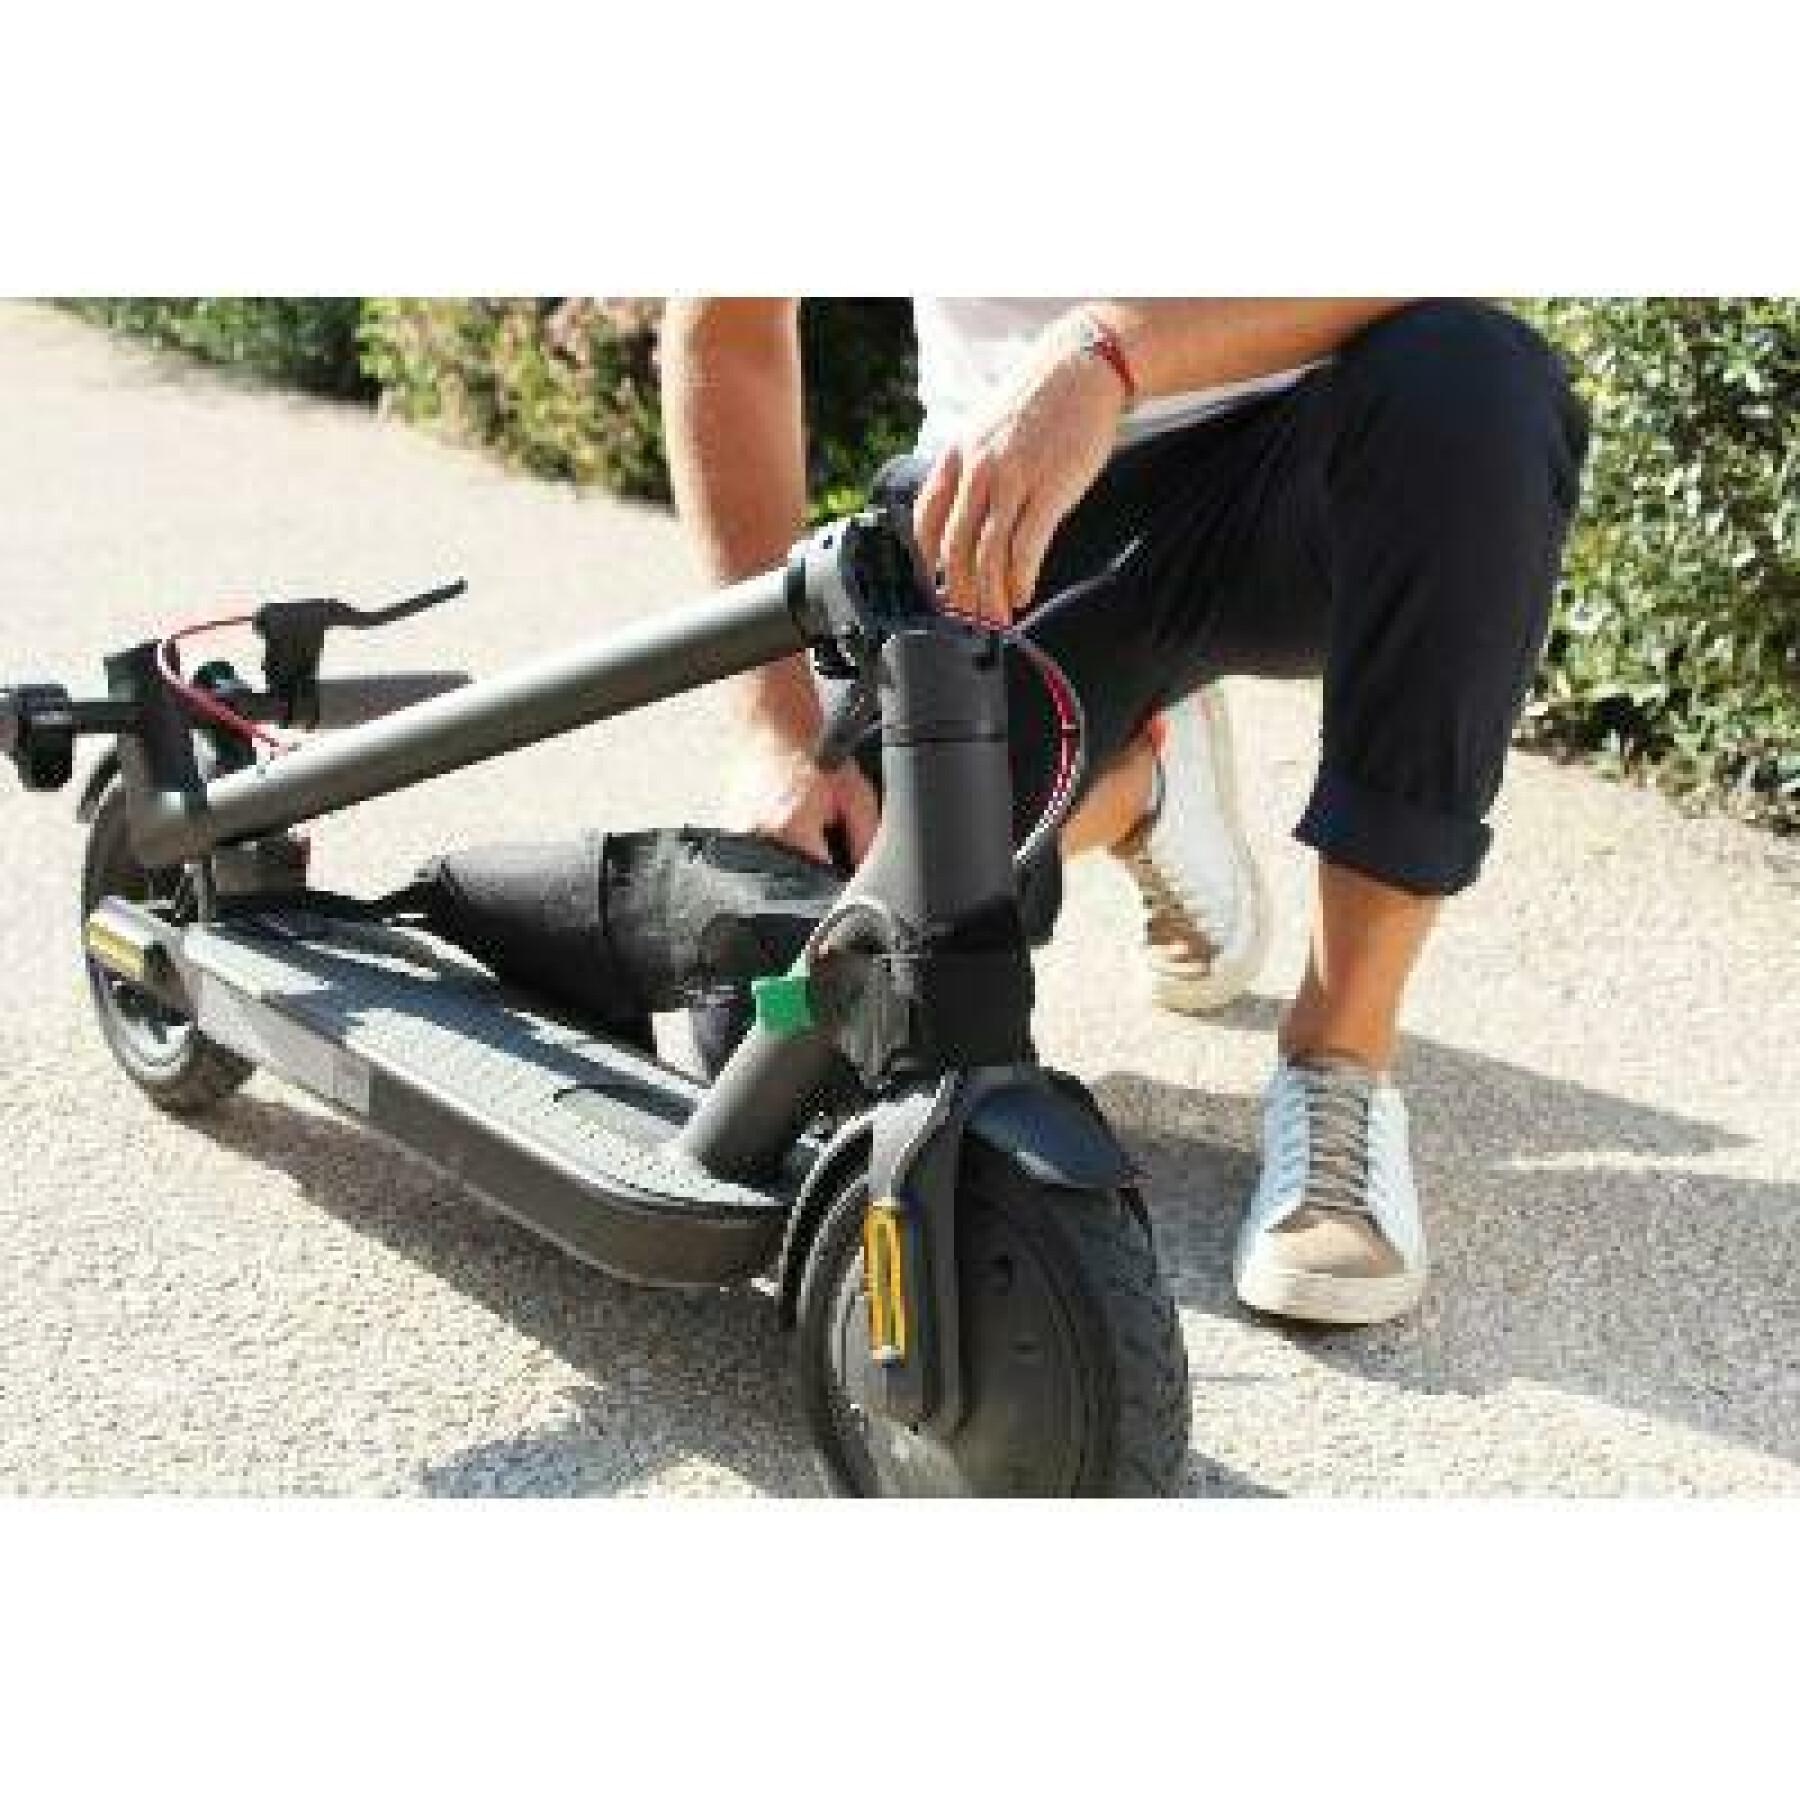 Universal system to easily carry your scooter Wantalis trotback